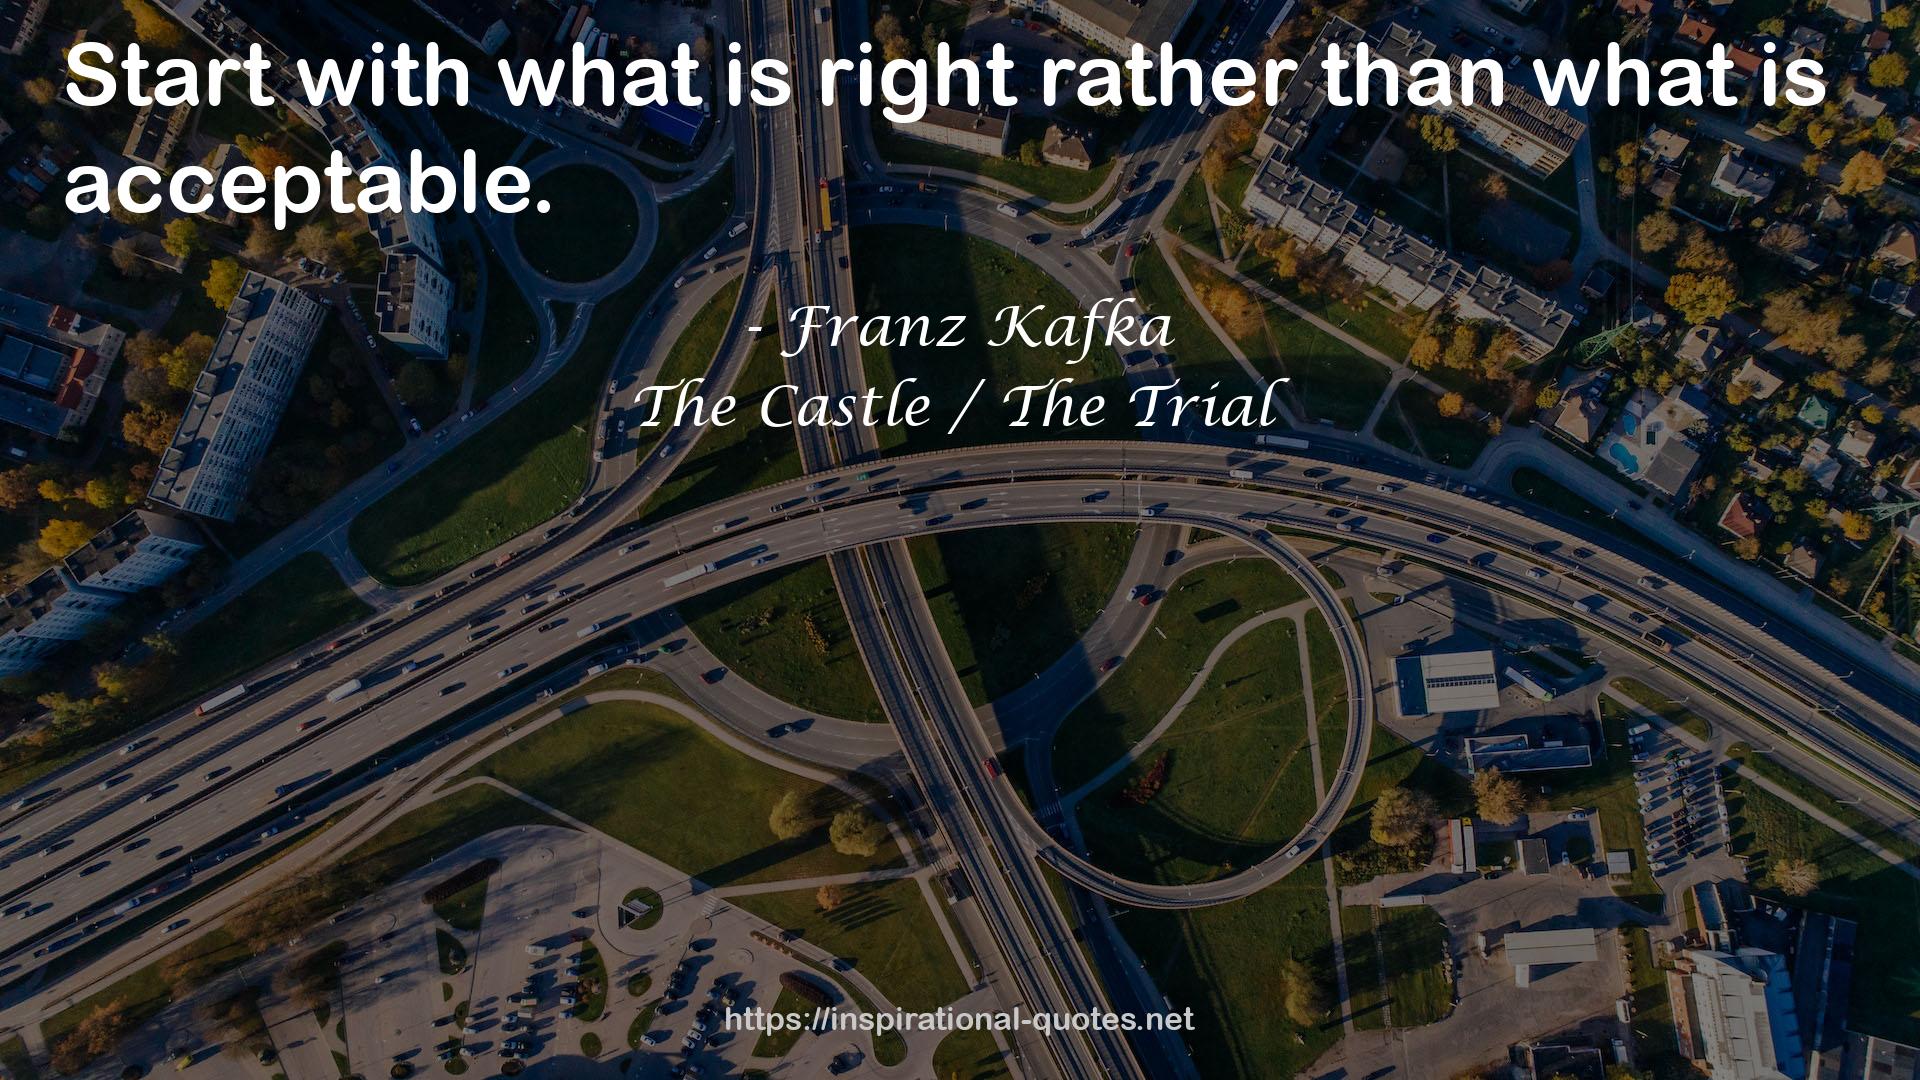 The Castle / The Trial QUOTES